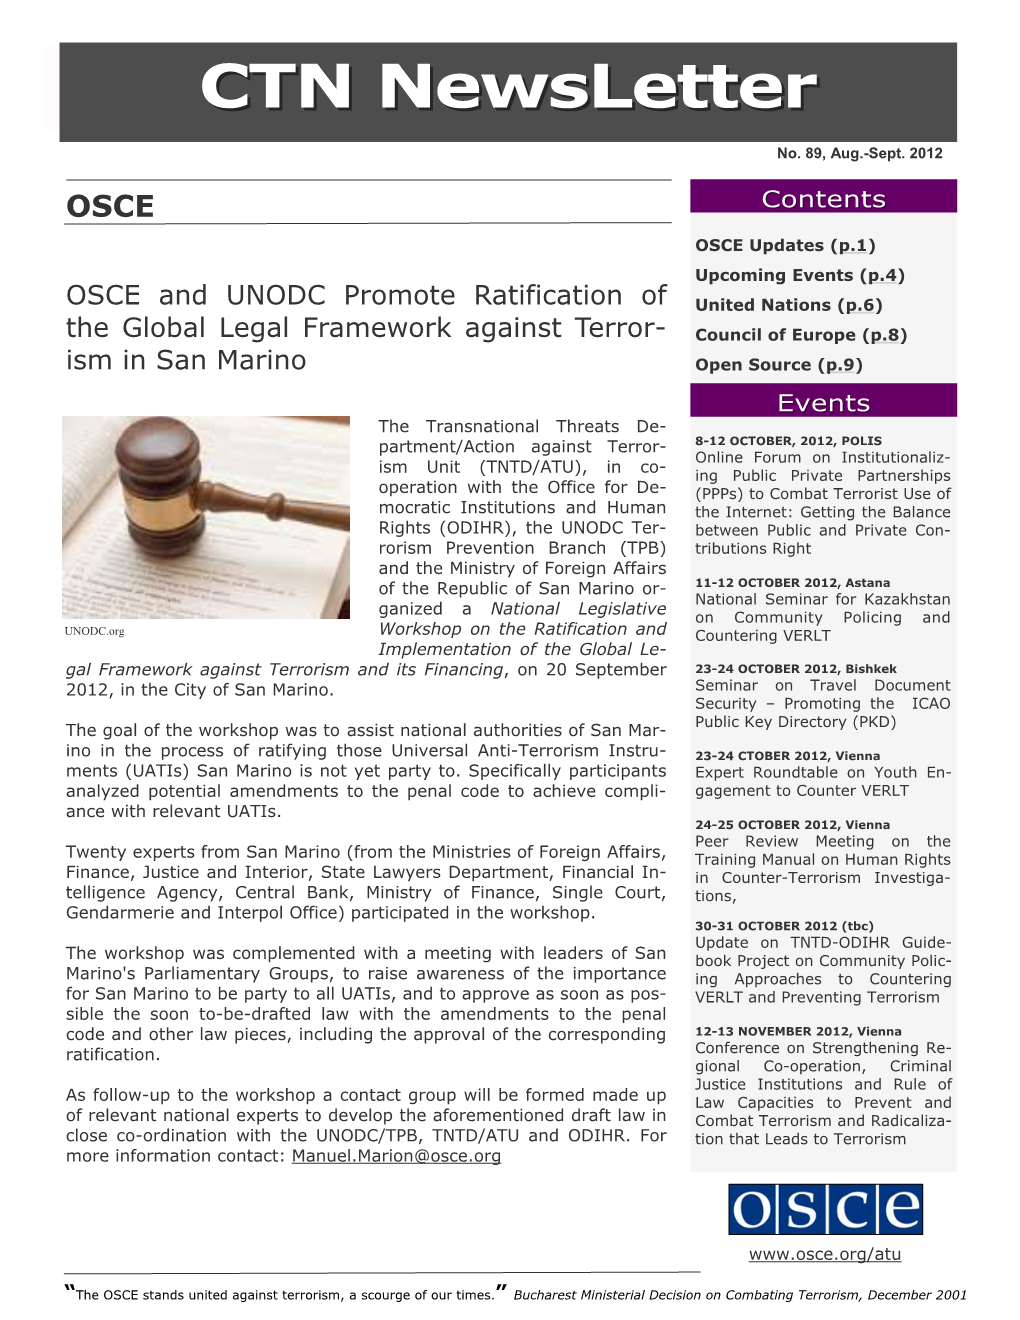 OSCE and UNODC Promote Ratification of the Global Legal